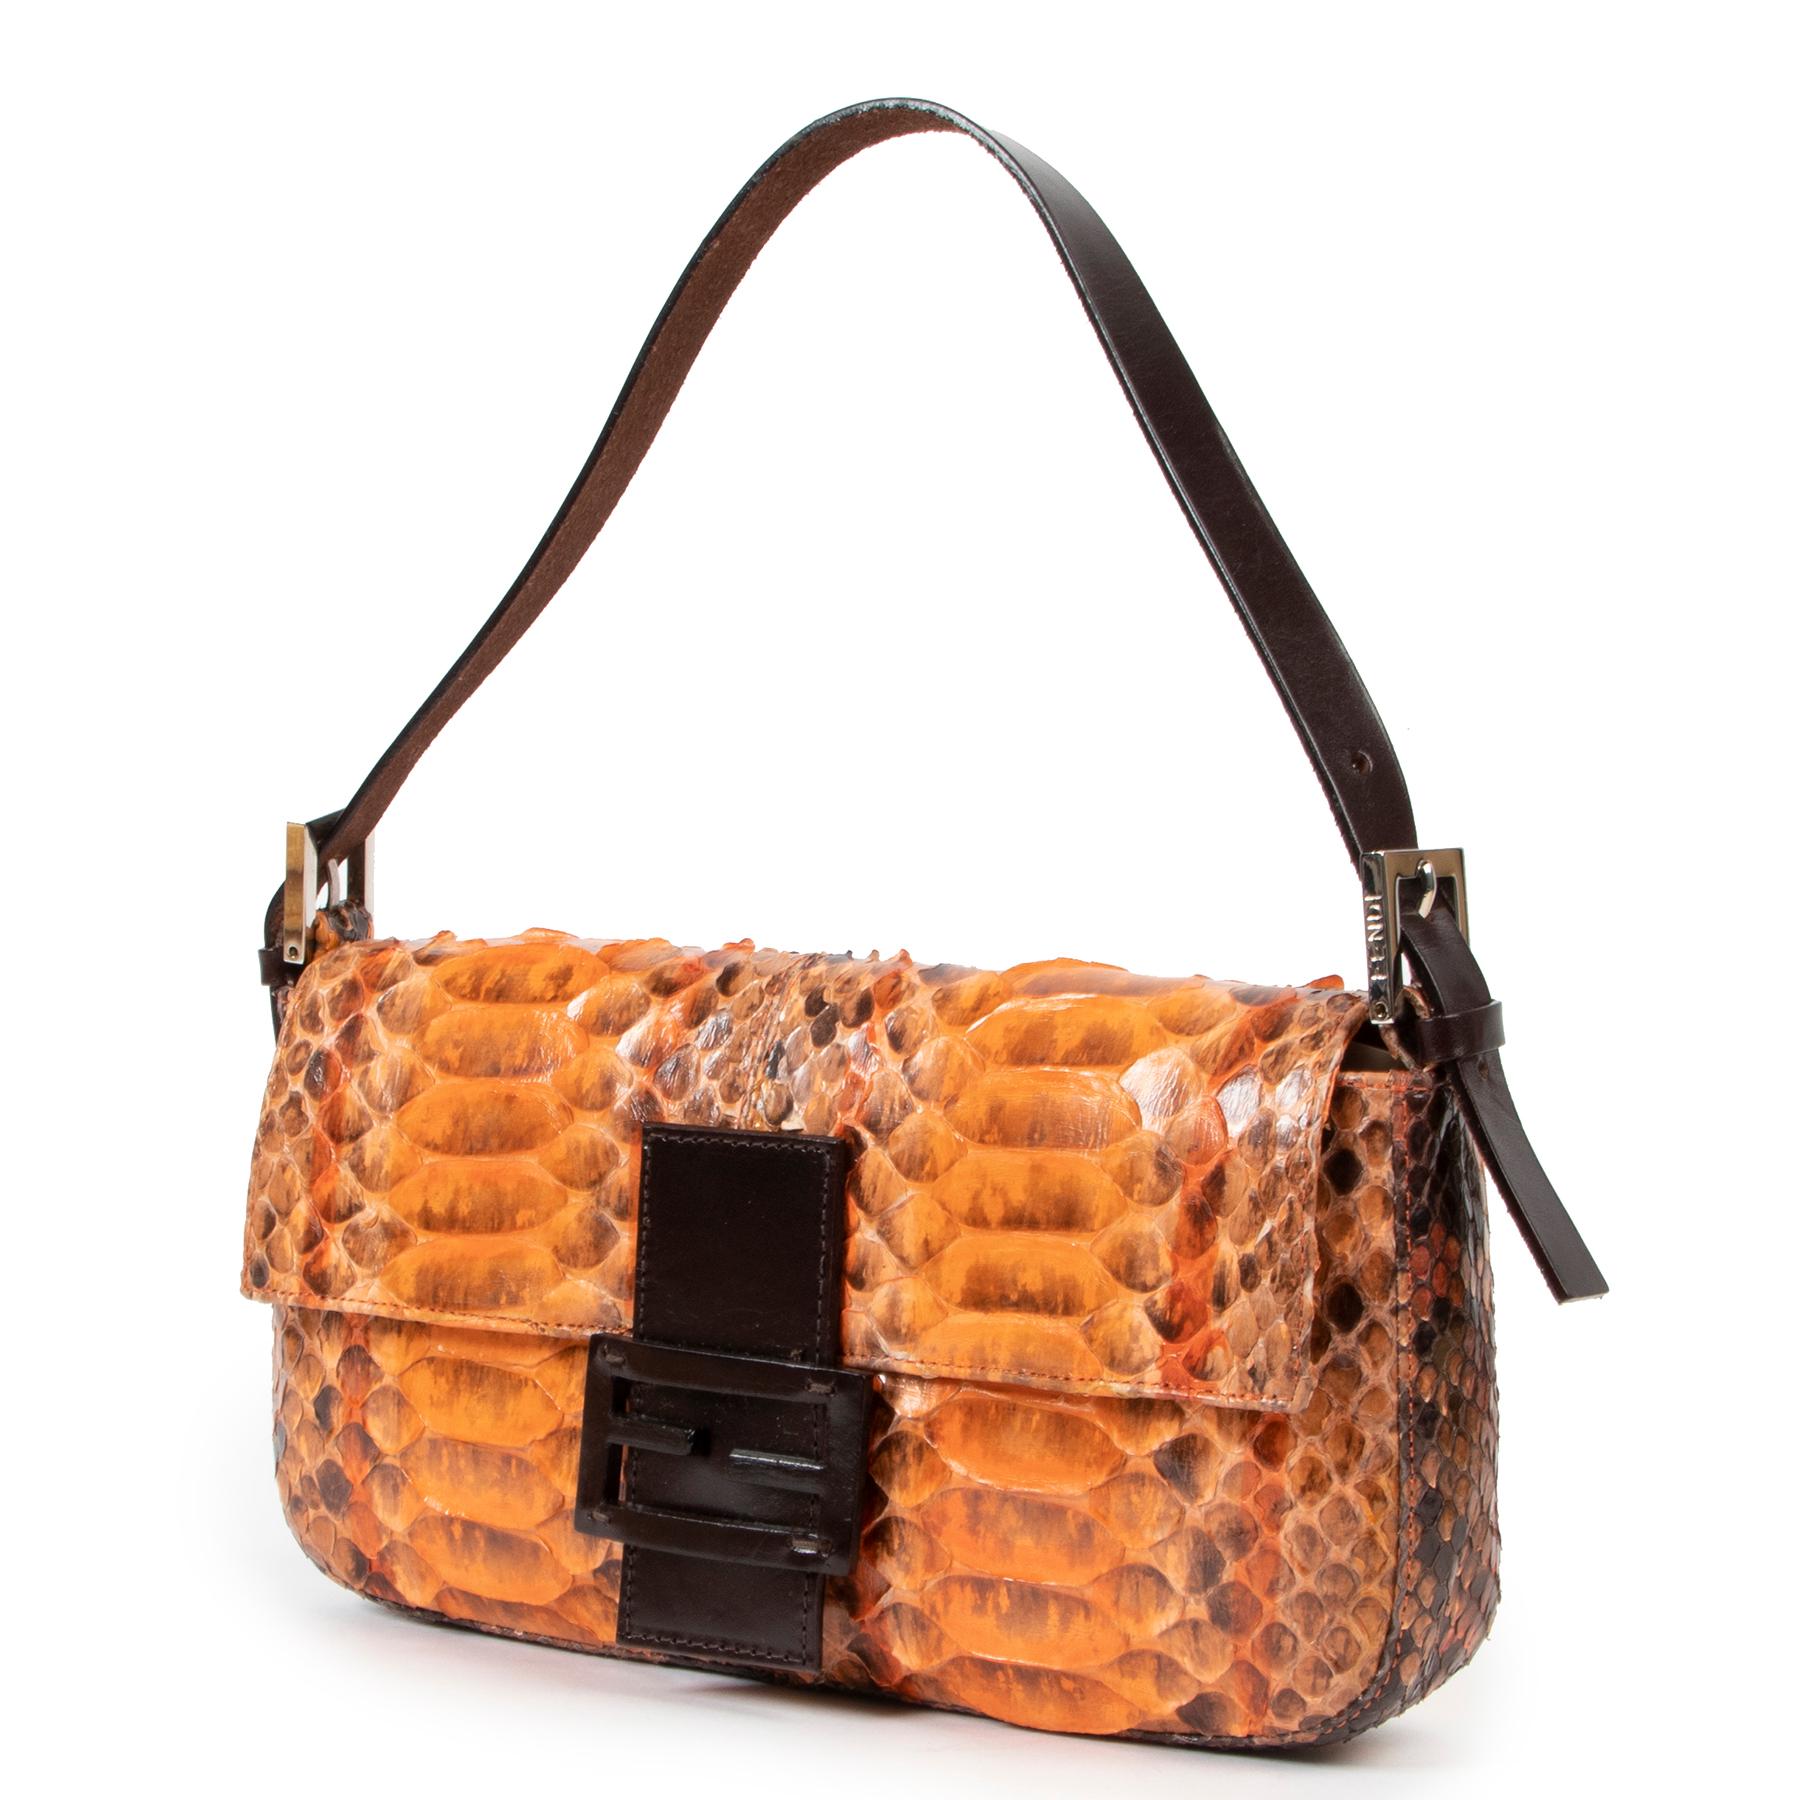 PLEASE NOTE: this bag can only shipped within the EU! 

Fendi Orange Painted Python Baguette Shoulder Bag

Oh boy, we love the Fendi Baguette bag! This Baguette is fashioned from orange painted python leather, which made us love it even more. It is